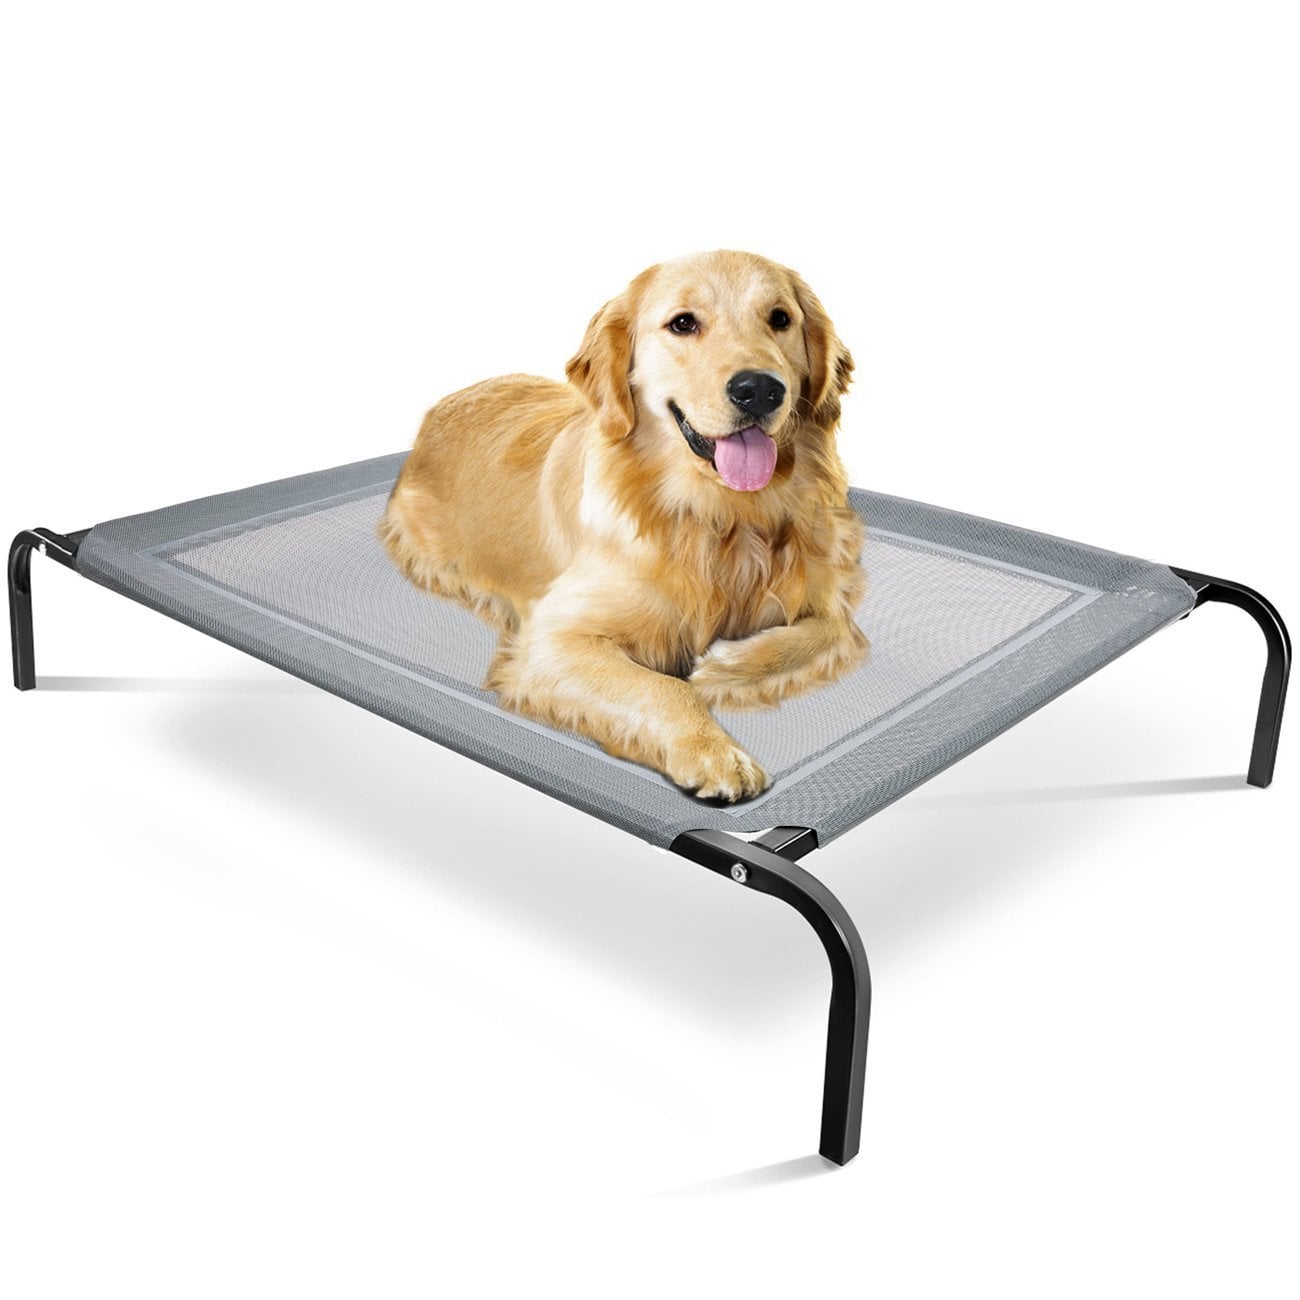 theracool dog bed